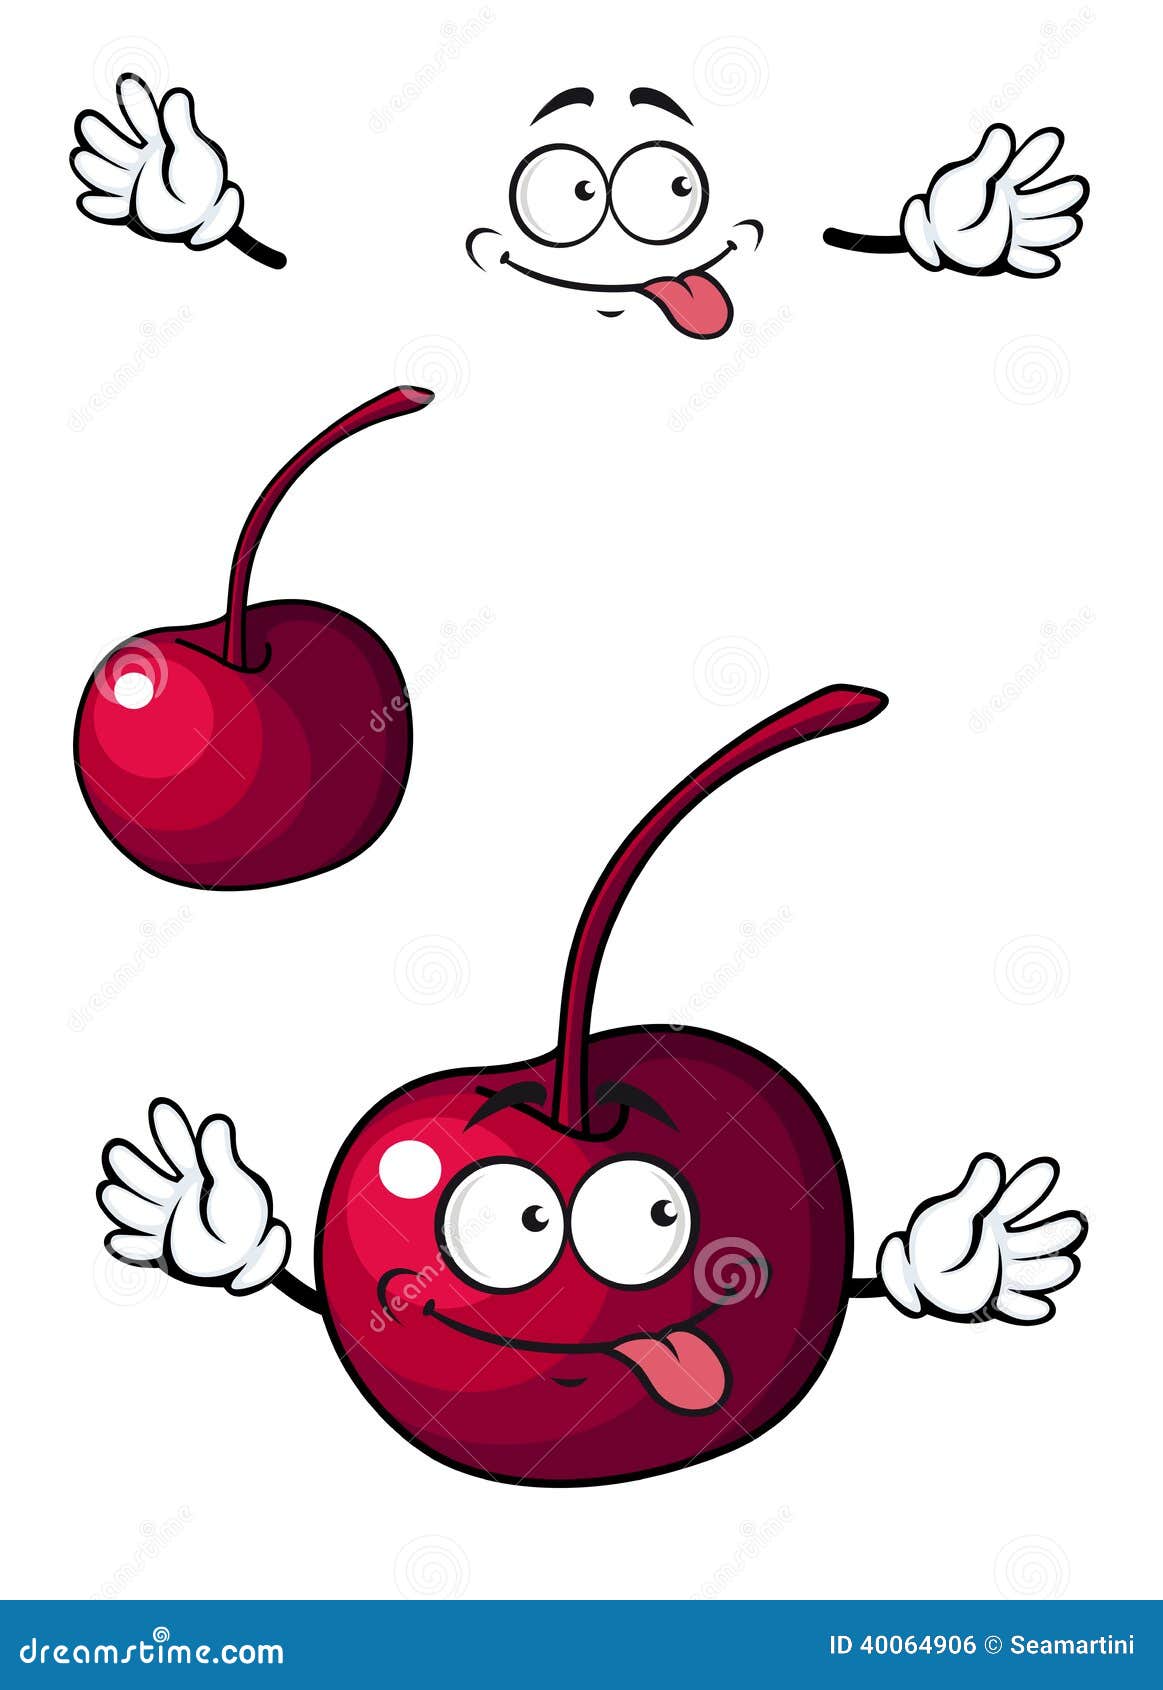 https://thumbs.dreamstime.com/z/happy-little-cherry-fruit-enthusiastic-big-toothy-grin-cartoon-illustration-40064906.jpg